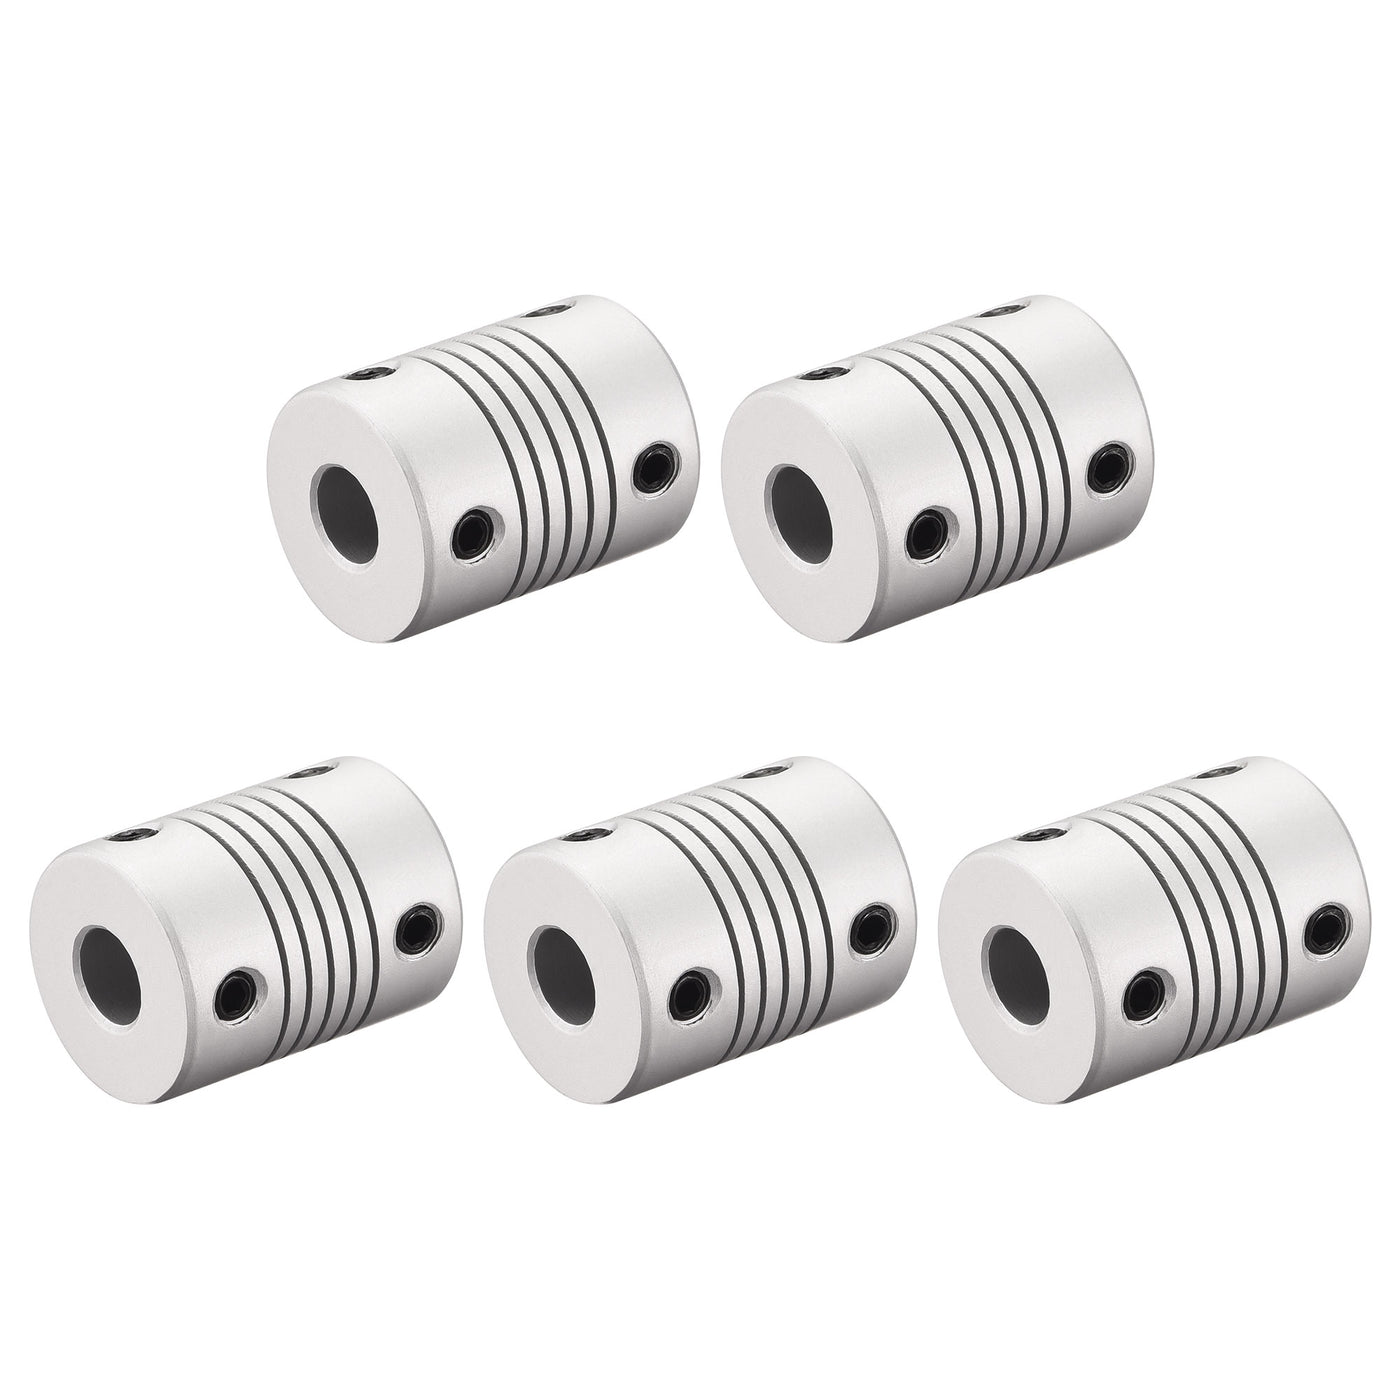 uxcell Uxcell 7mm to 7mm Aluminum Alloy Shaft Coupling Flexible Coupler L25xD19 Silver,5pcs